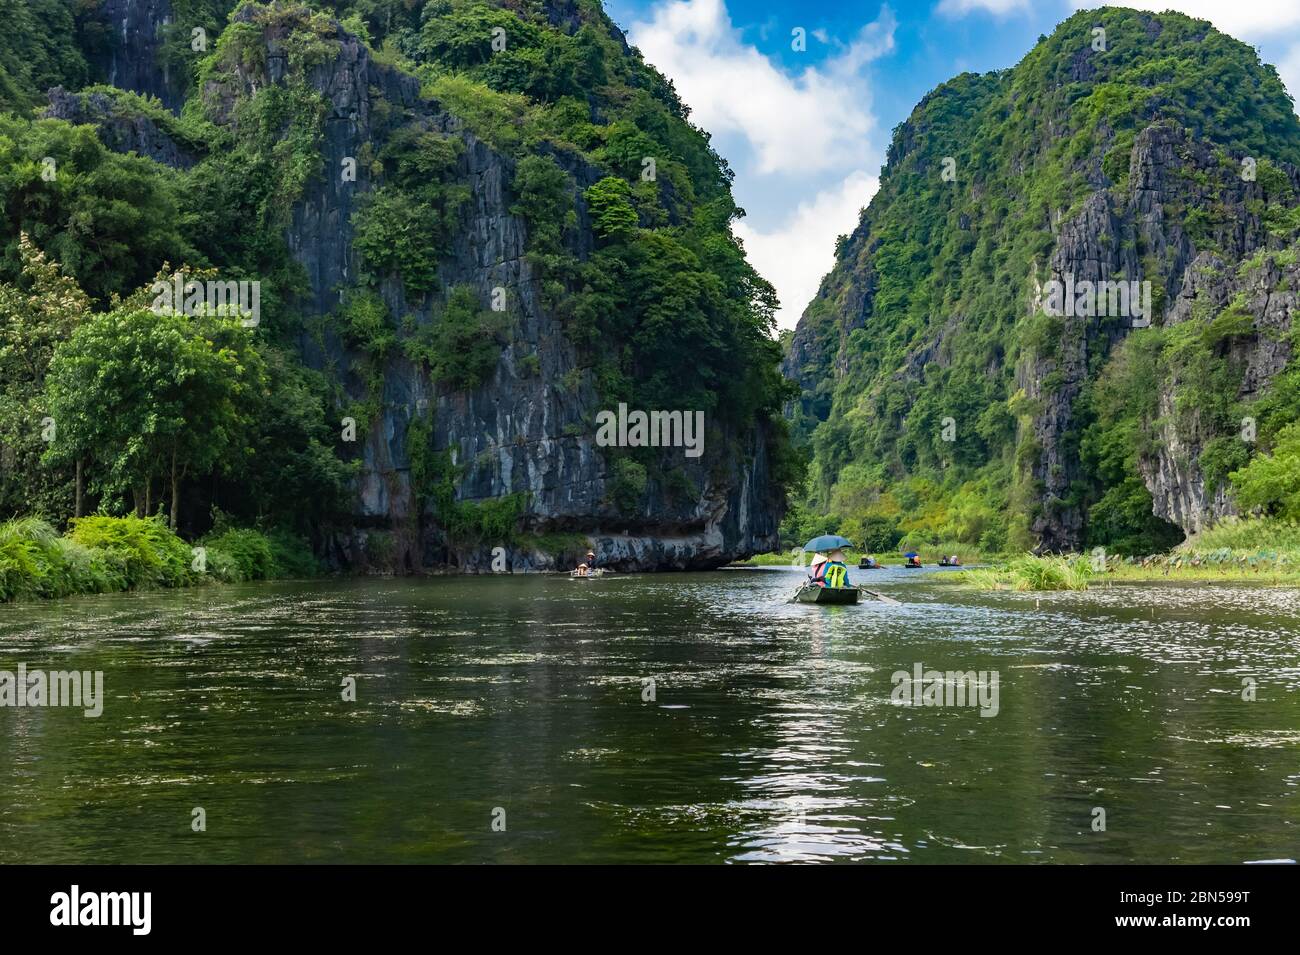 Tourists in a boat exploring the scenery Ngo Dong River. Beautiful scenery, cliffs and river. Ninh Binh province, Vietnam Stock Photo